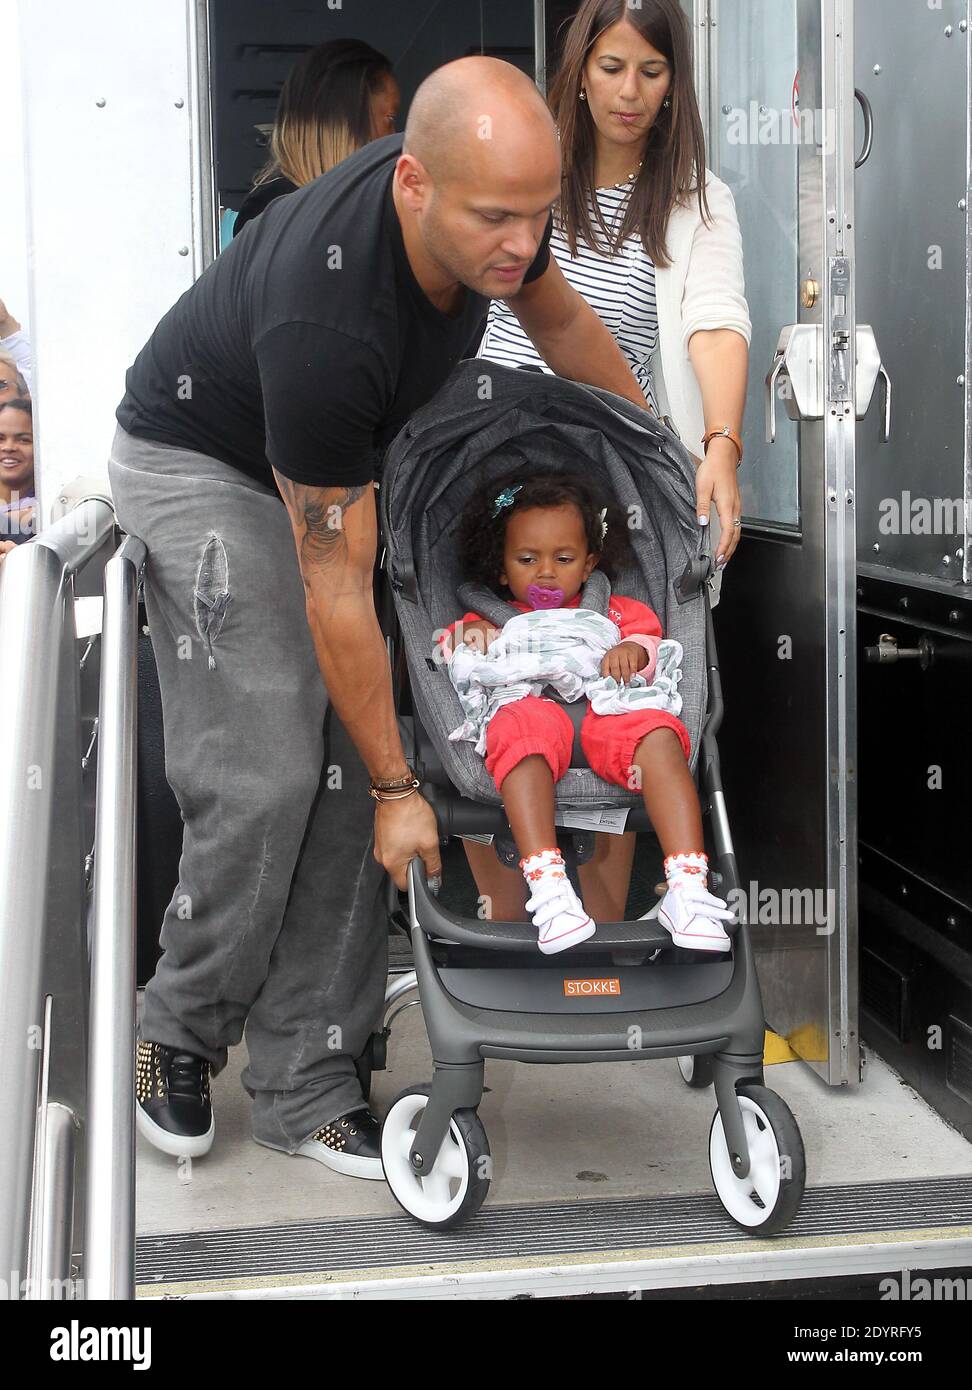 Please hide children's faces prior to the publication - British singer Mel B at the Empire State Building with her husband Stephen Belafonte and children to promote the live show 'America's Got Talent' in New York City, NY, USA on July 25, 2013. Photo by Charles Guerin/ABACAPRESS.COM Stock Photo